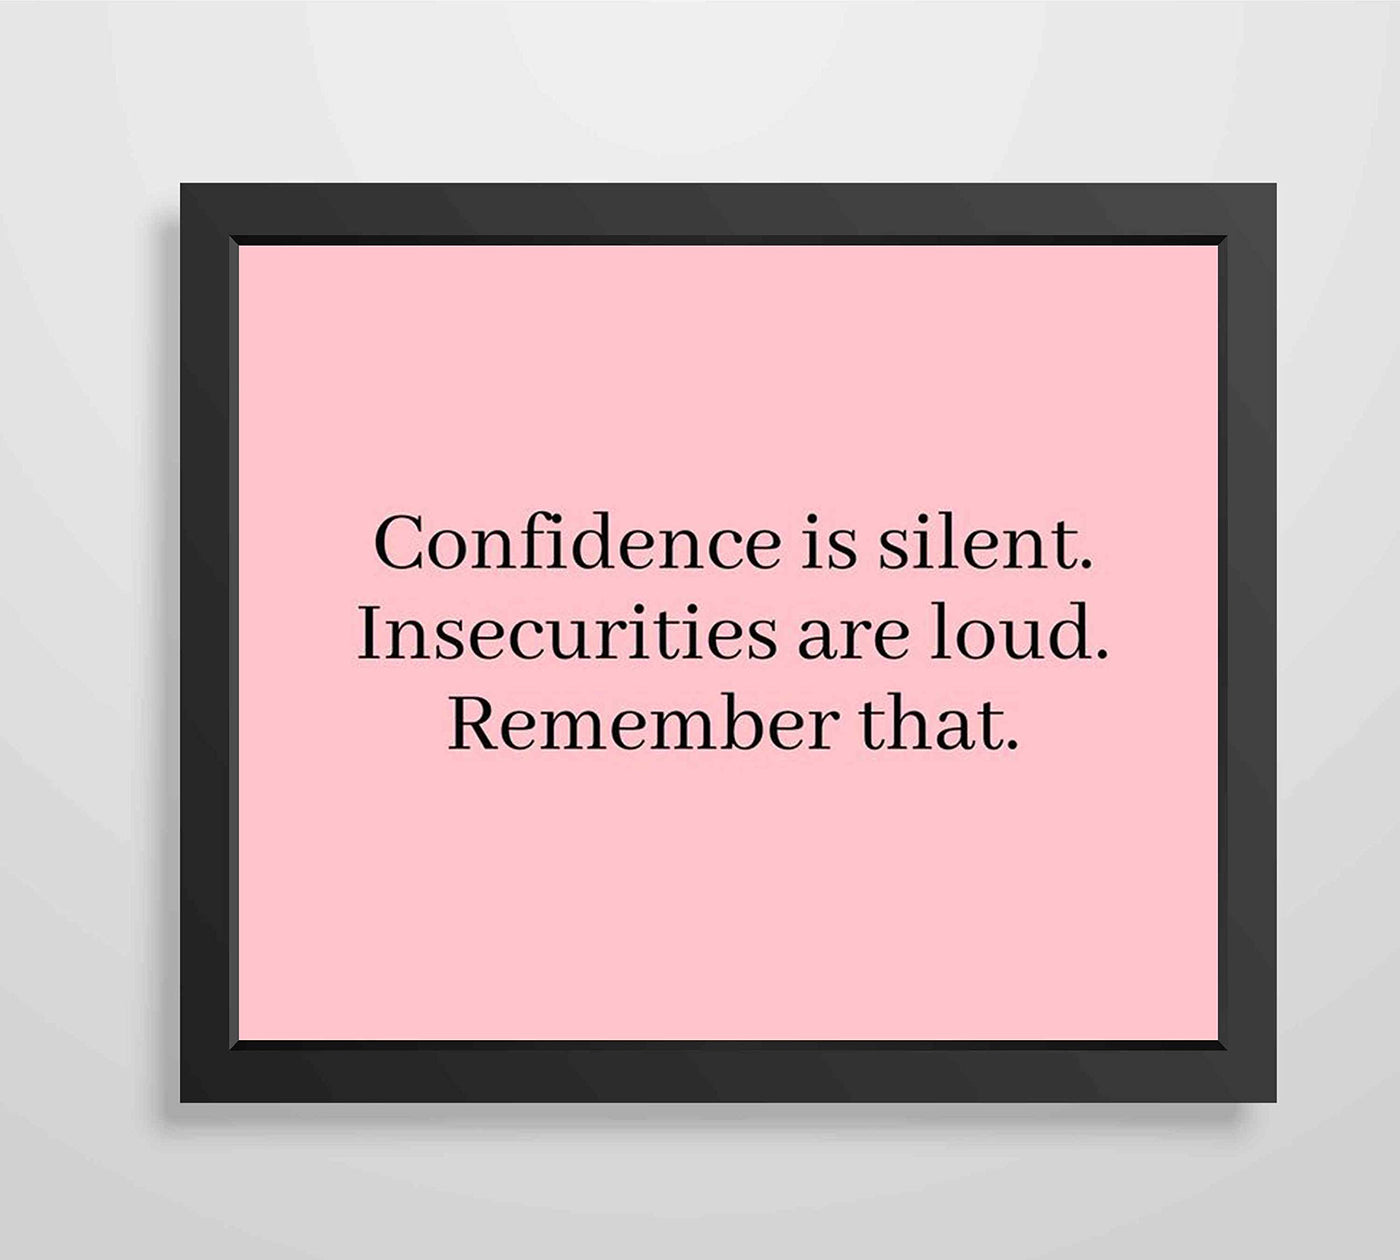 Confidence Is Silent-Insecurities Are Loud-Inspirational Quotes Wall Sign-10 x 8" Modern Typographic Print-Ready to Frame. Motivational Home-Office-School Decor. Great Inspiring Poster for Teens!